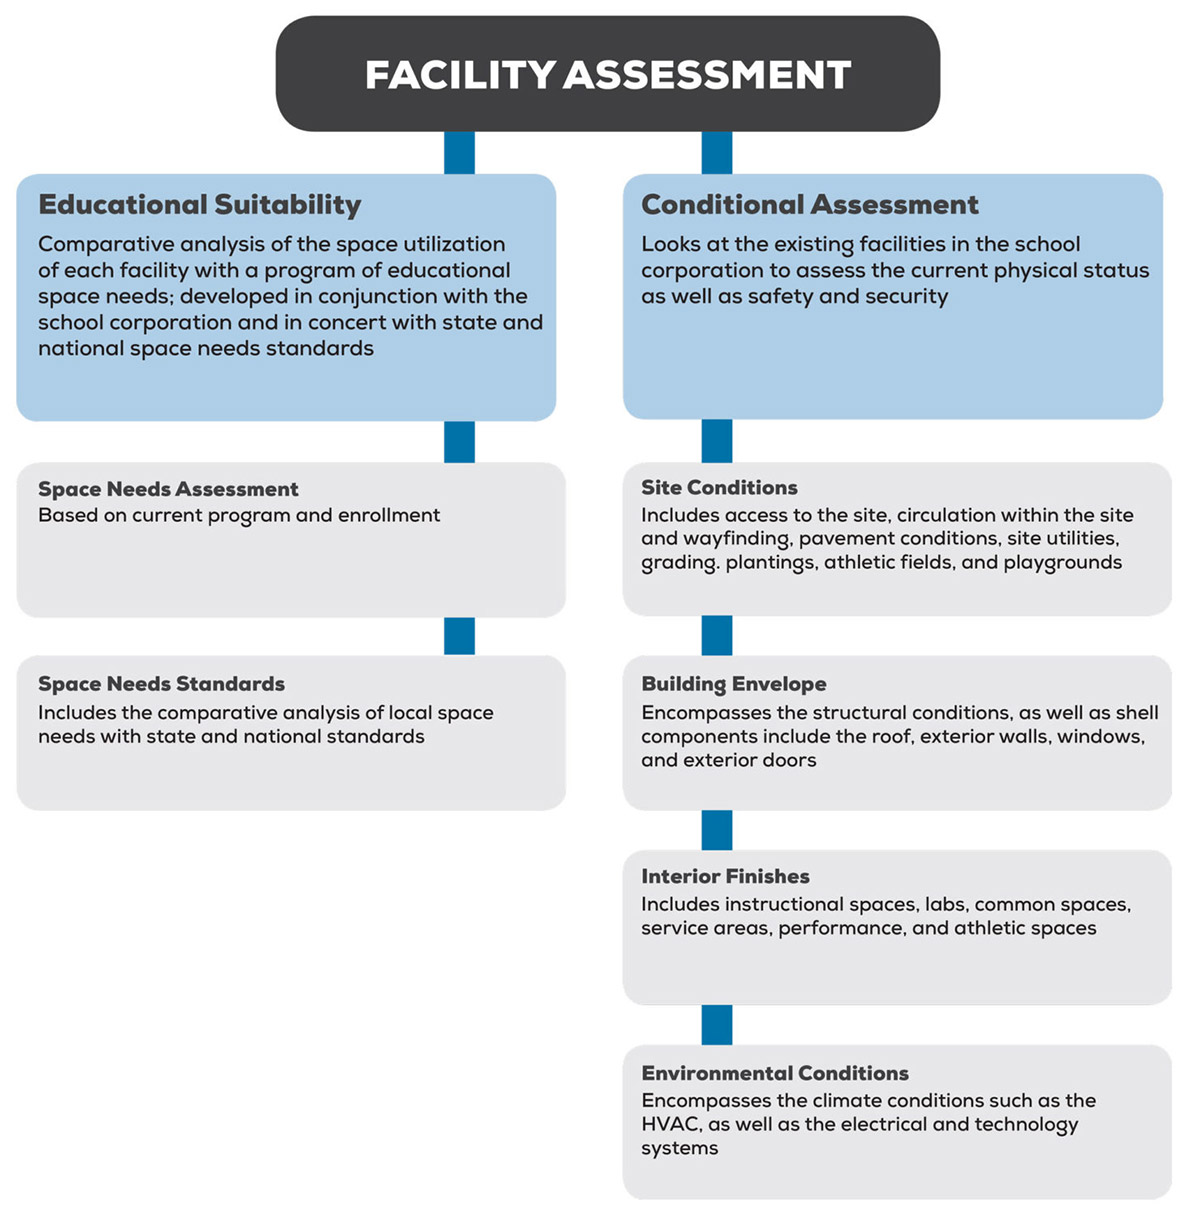 Facility Assessment Chart - Education Suitability and Conditional Assessment